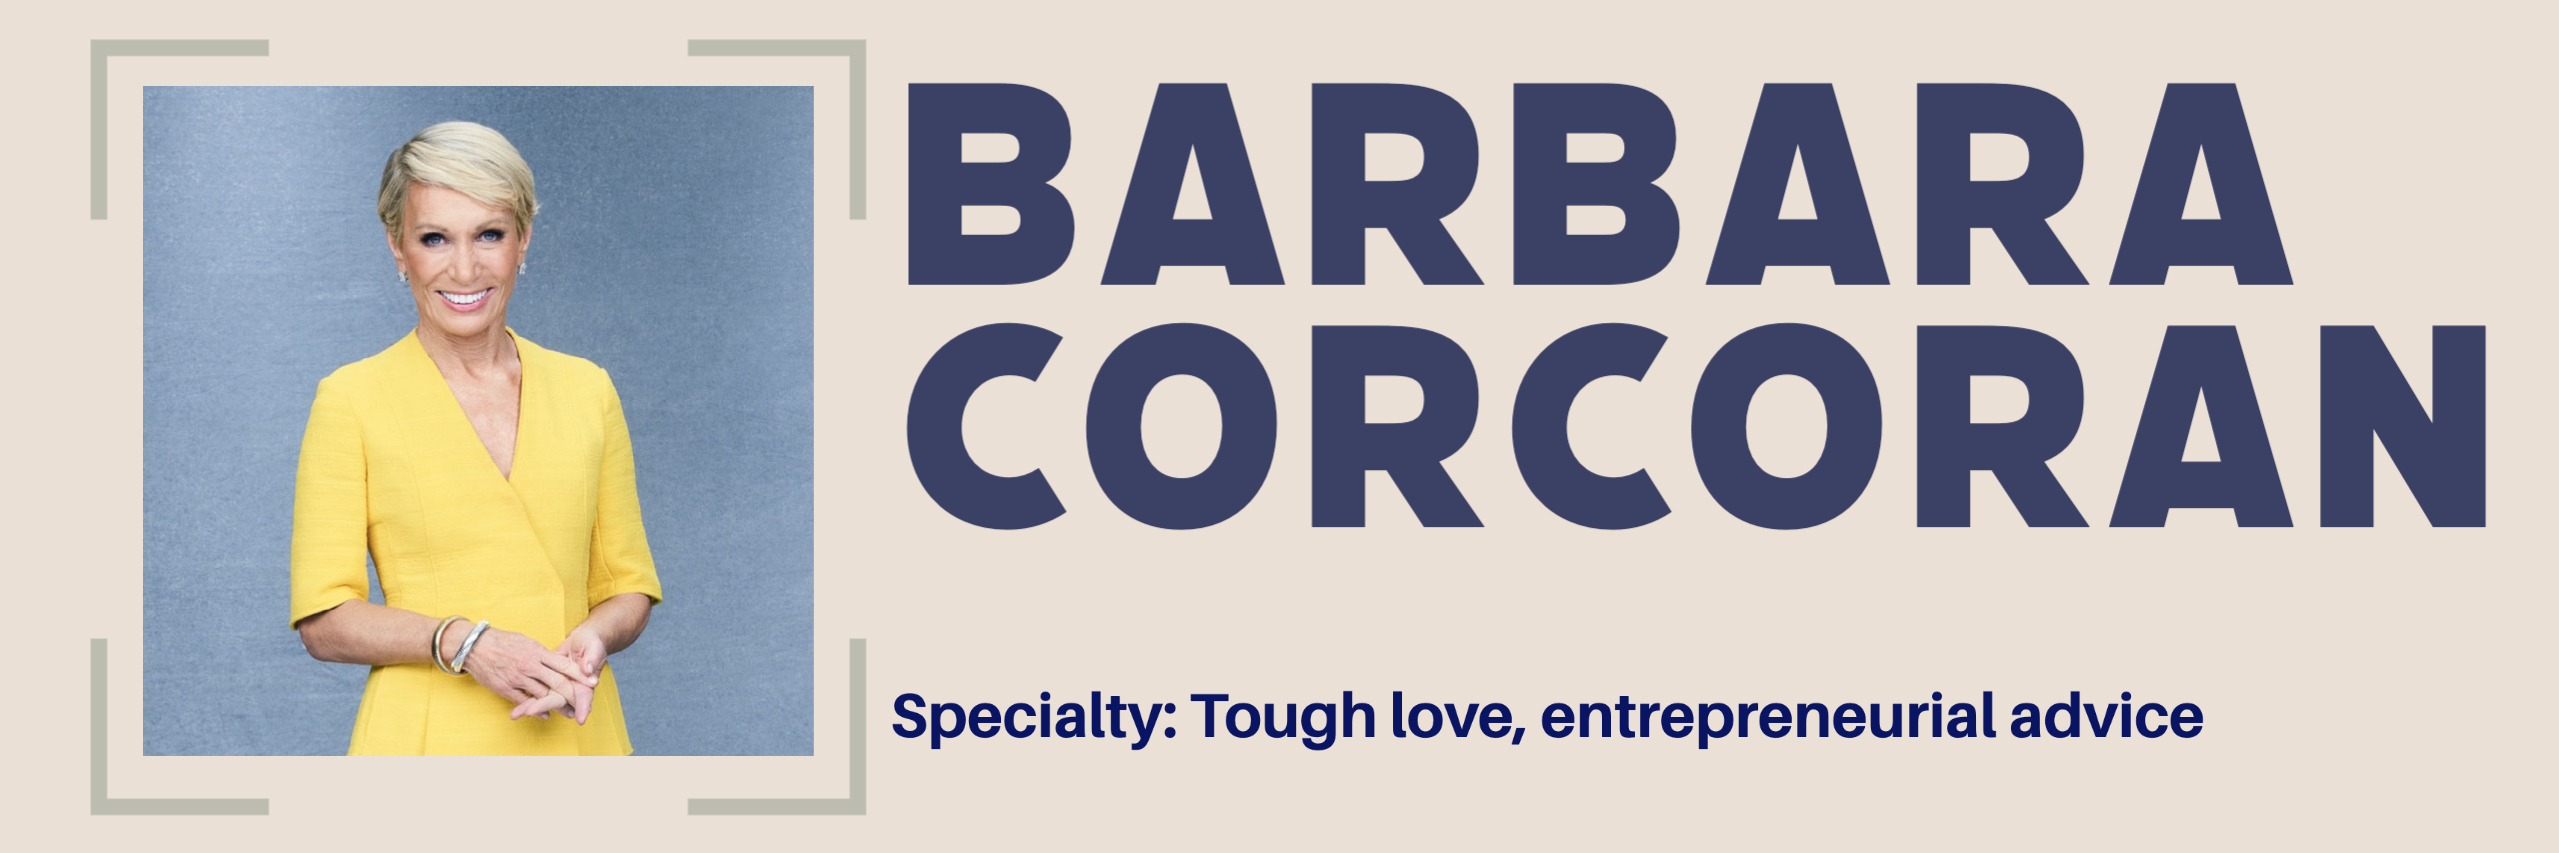 Barbara Corcoran, best known for her Shark Tank appearances, is another follow on this list that will instantly inspire you